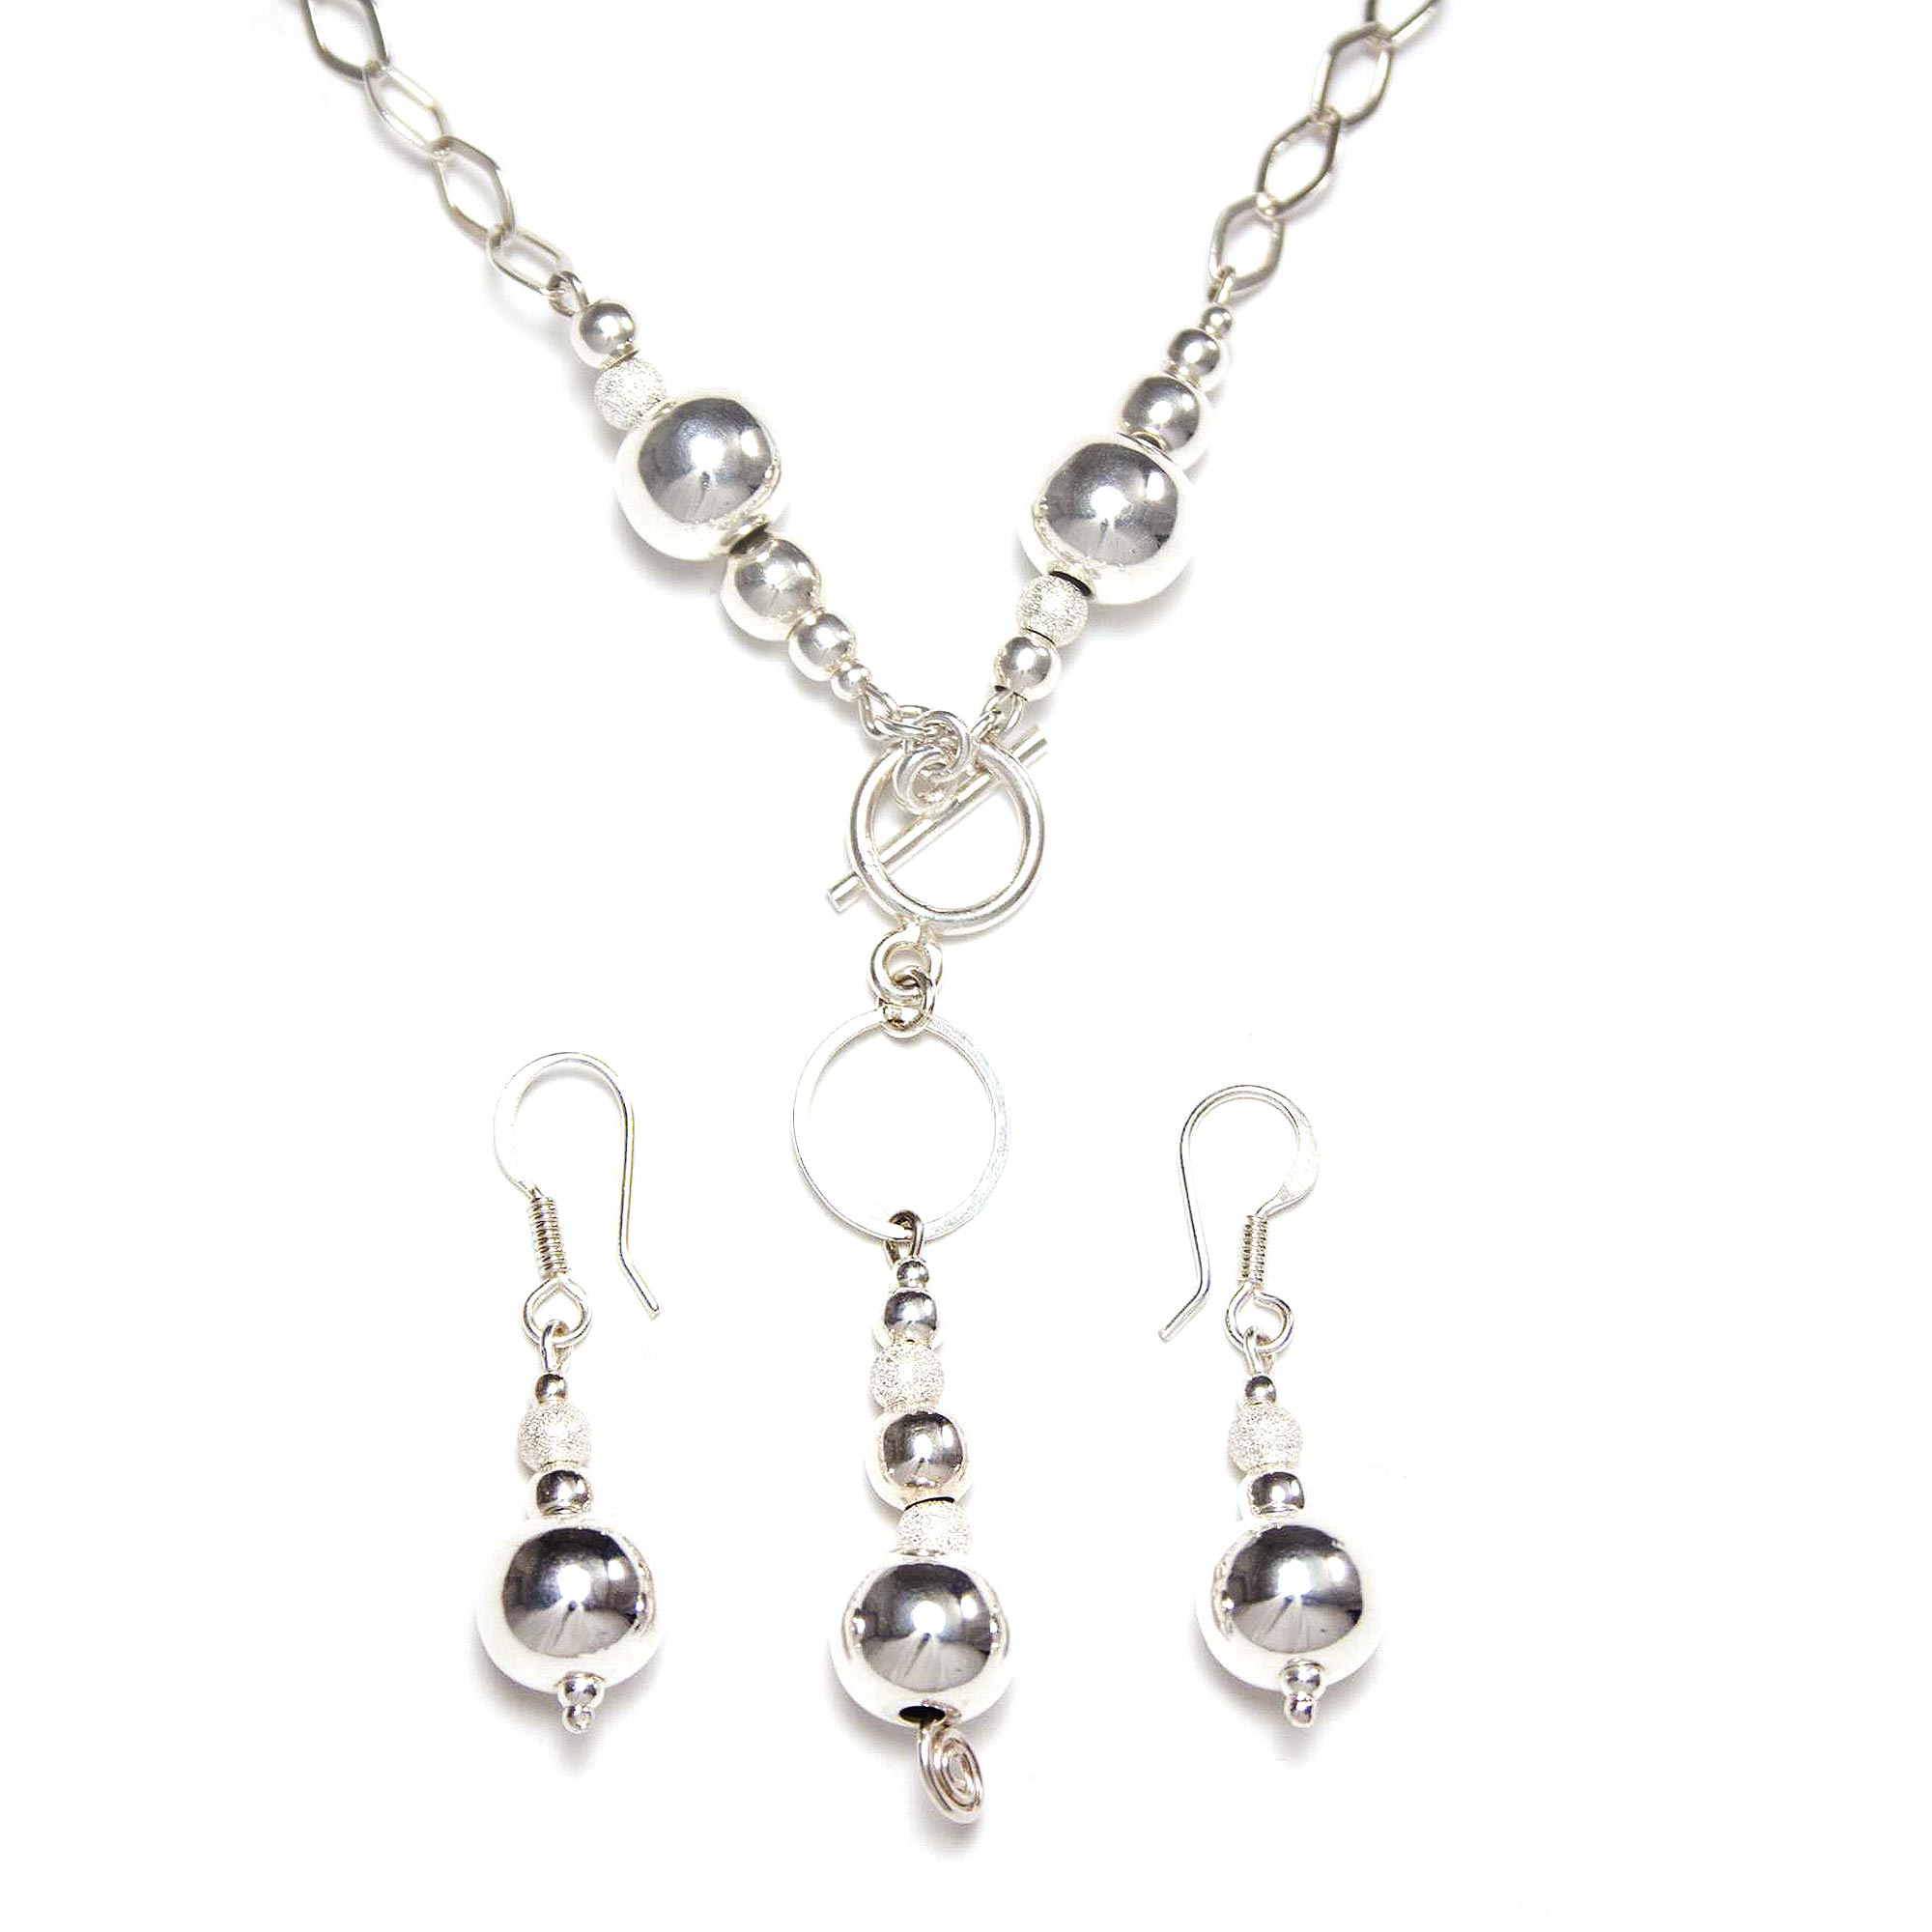 Mexico Handcrafted 925 Sterling Silver Jewelry Set Taxco - Moon Over ...